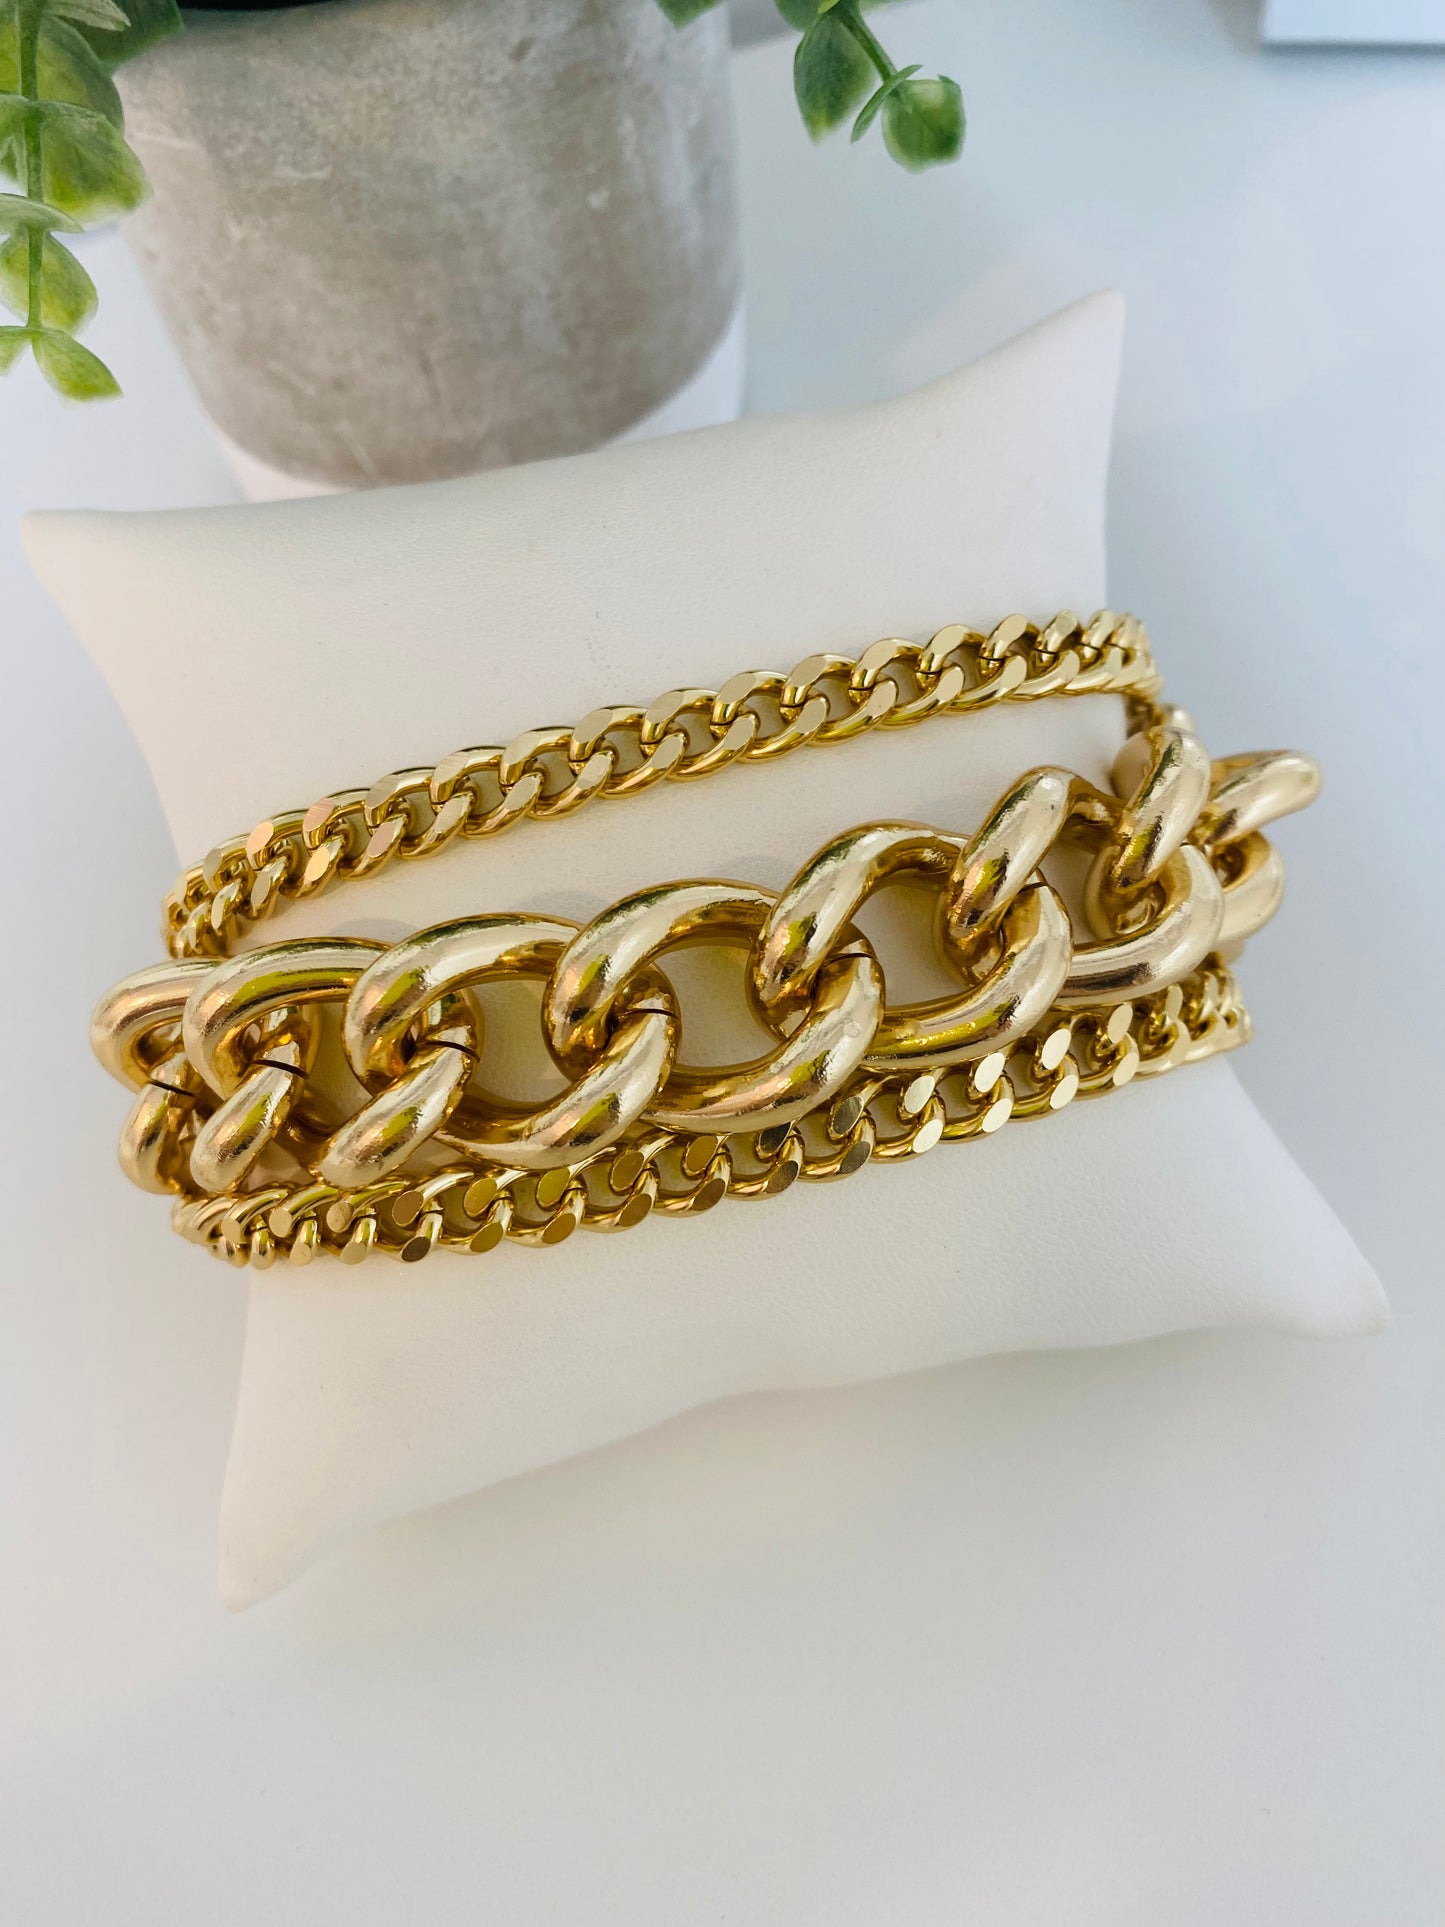 Gold Plated 3in1 Gold Chain Bracelet